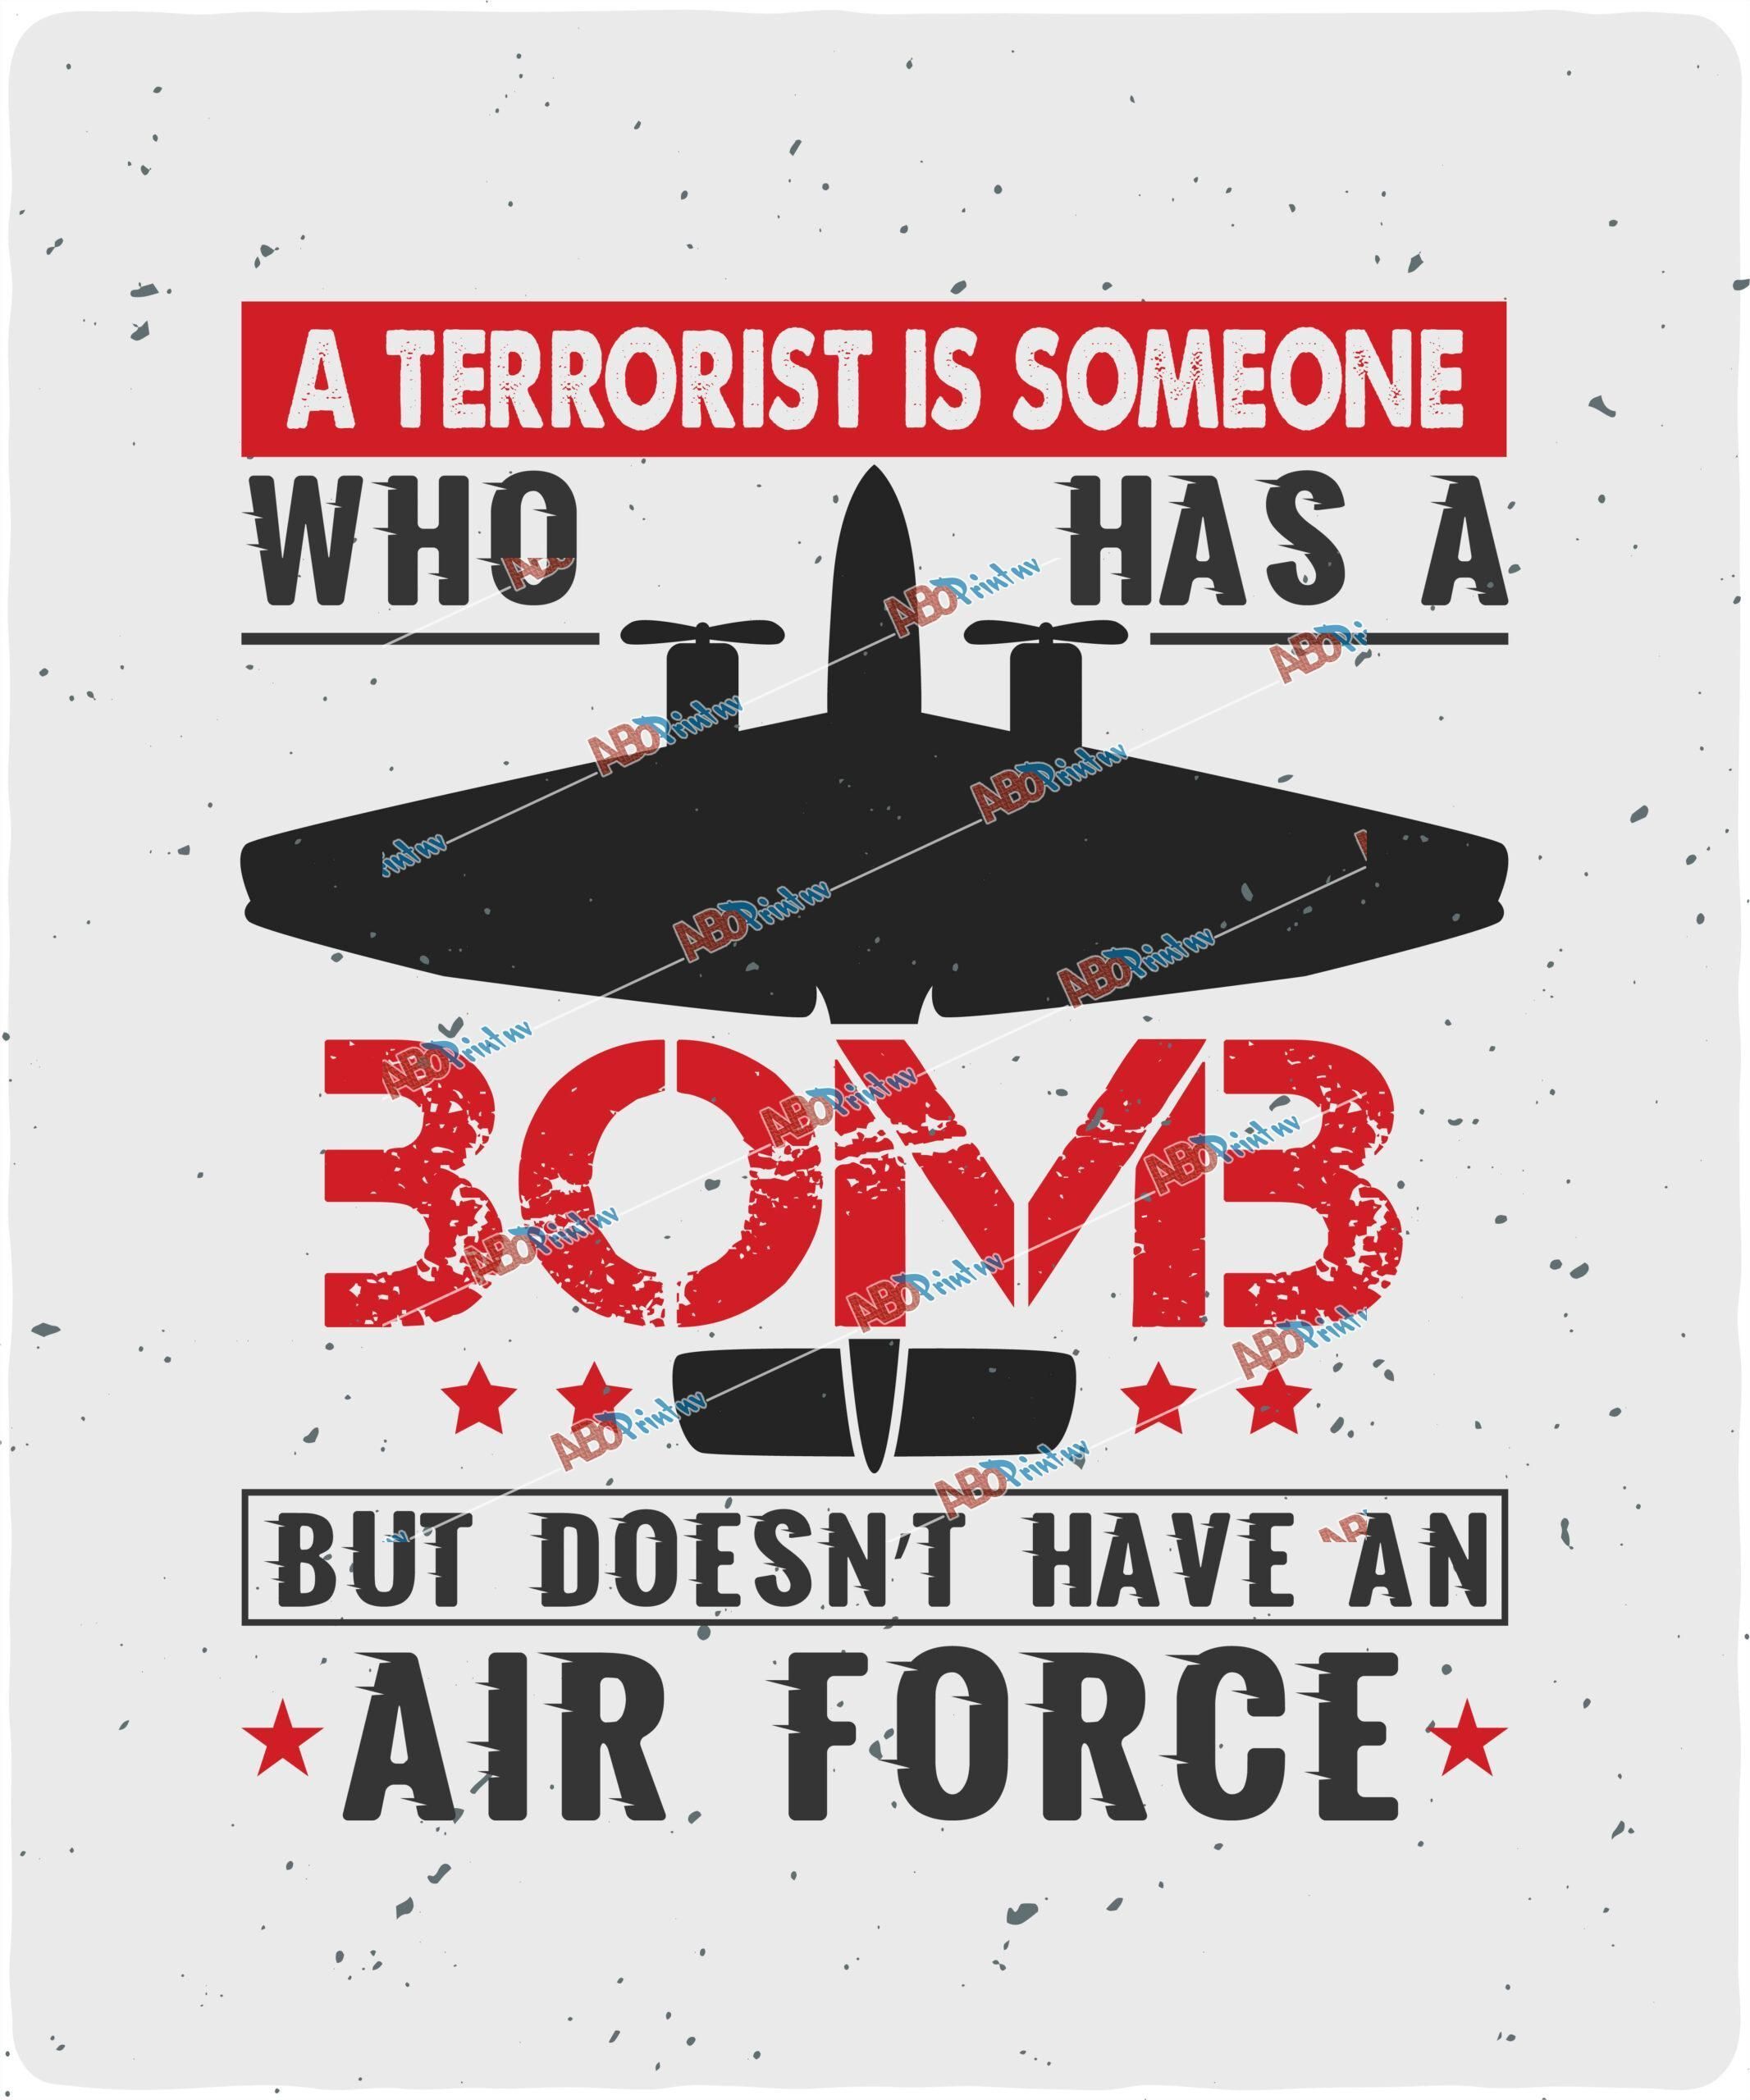 A terrorist is someone who has a bomb, but doesn’t have an air force